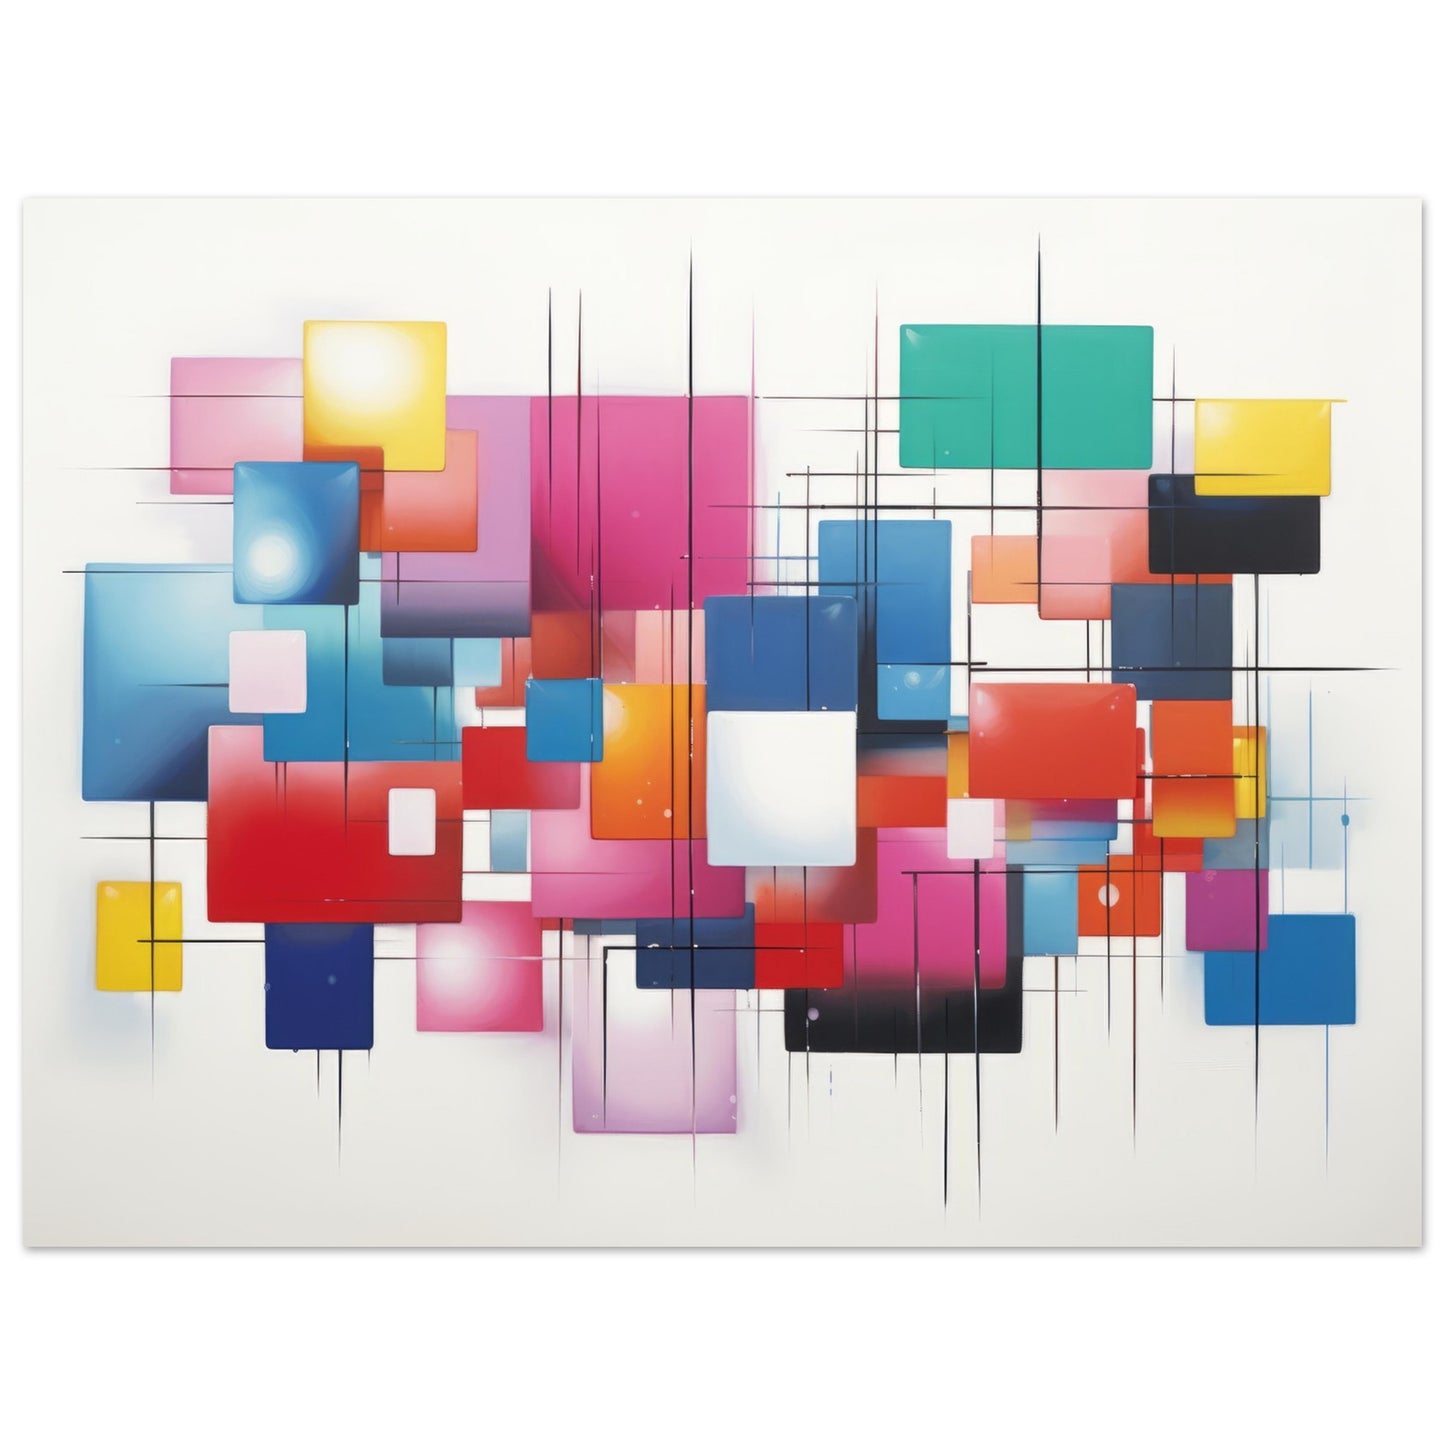 Colorful art print titled "String Dimension" featuring interconnected squares and rectangles in varying hues with a dripping effect at the bottom.